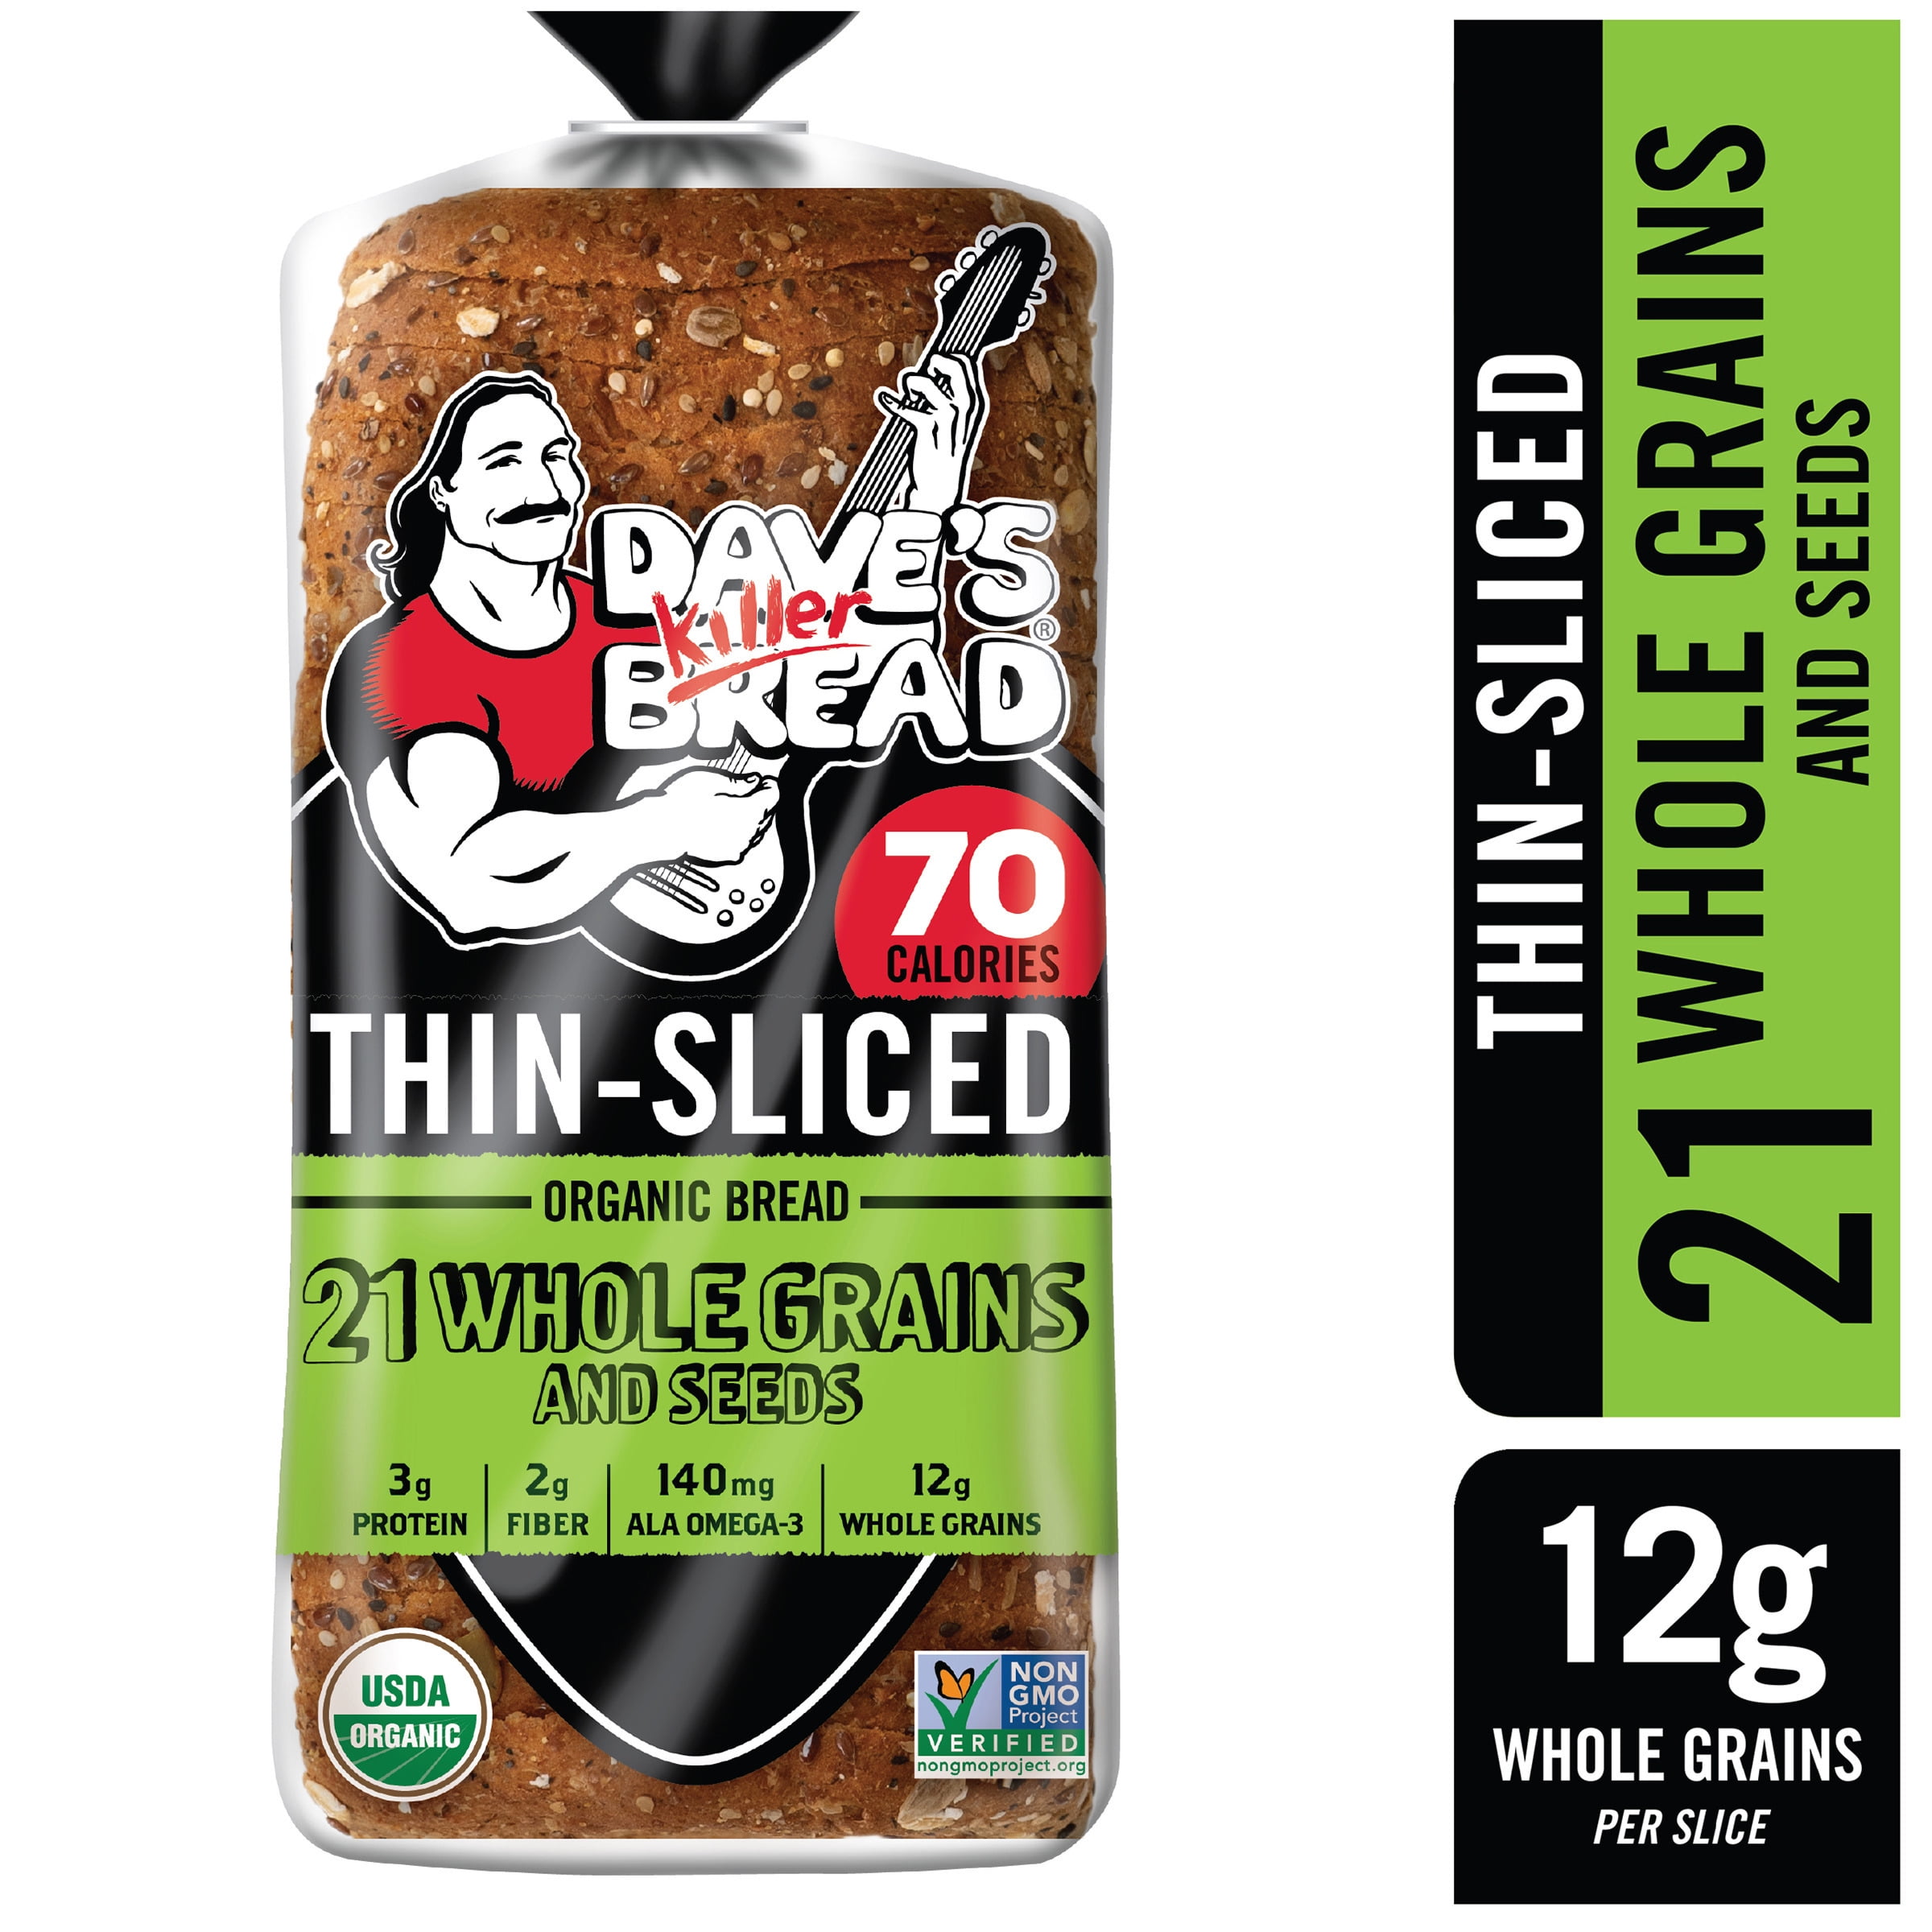 dave-s-killer-bread-organic-thin-sliced-21-whole-grains-and-seeds-bread